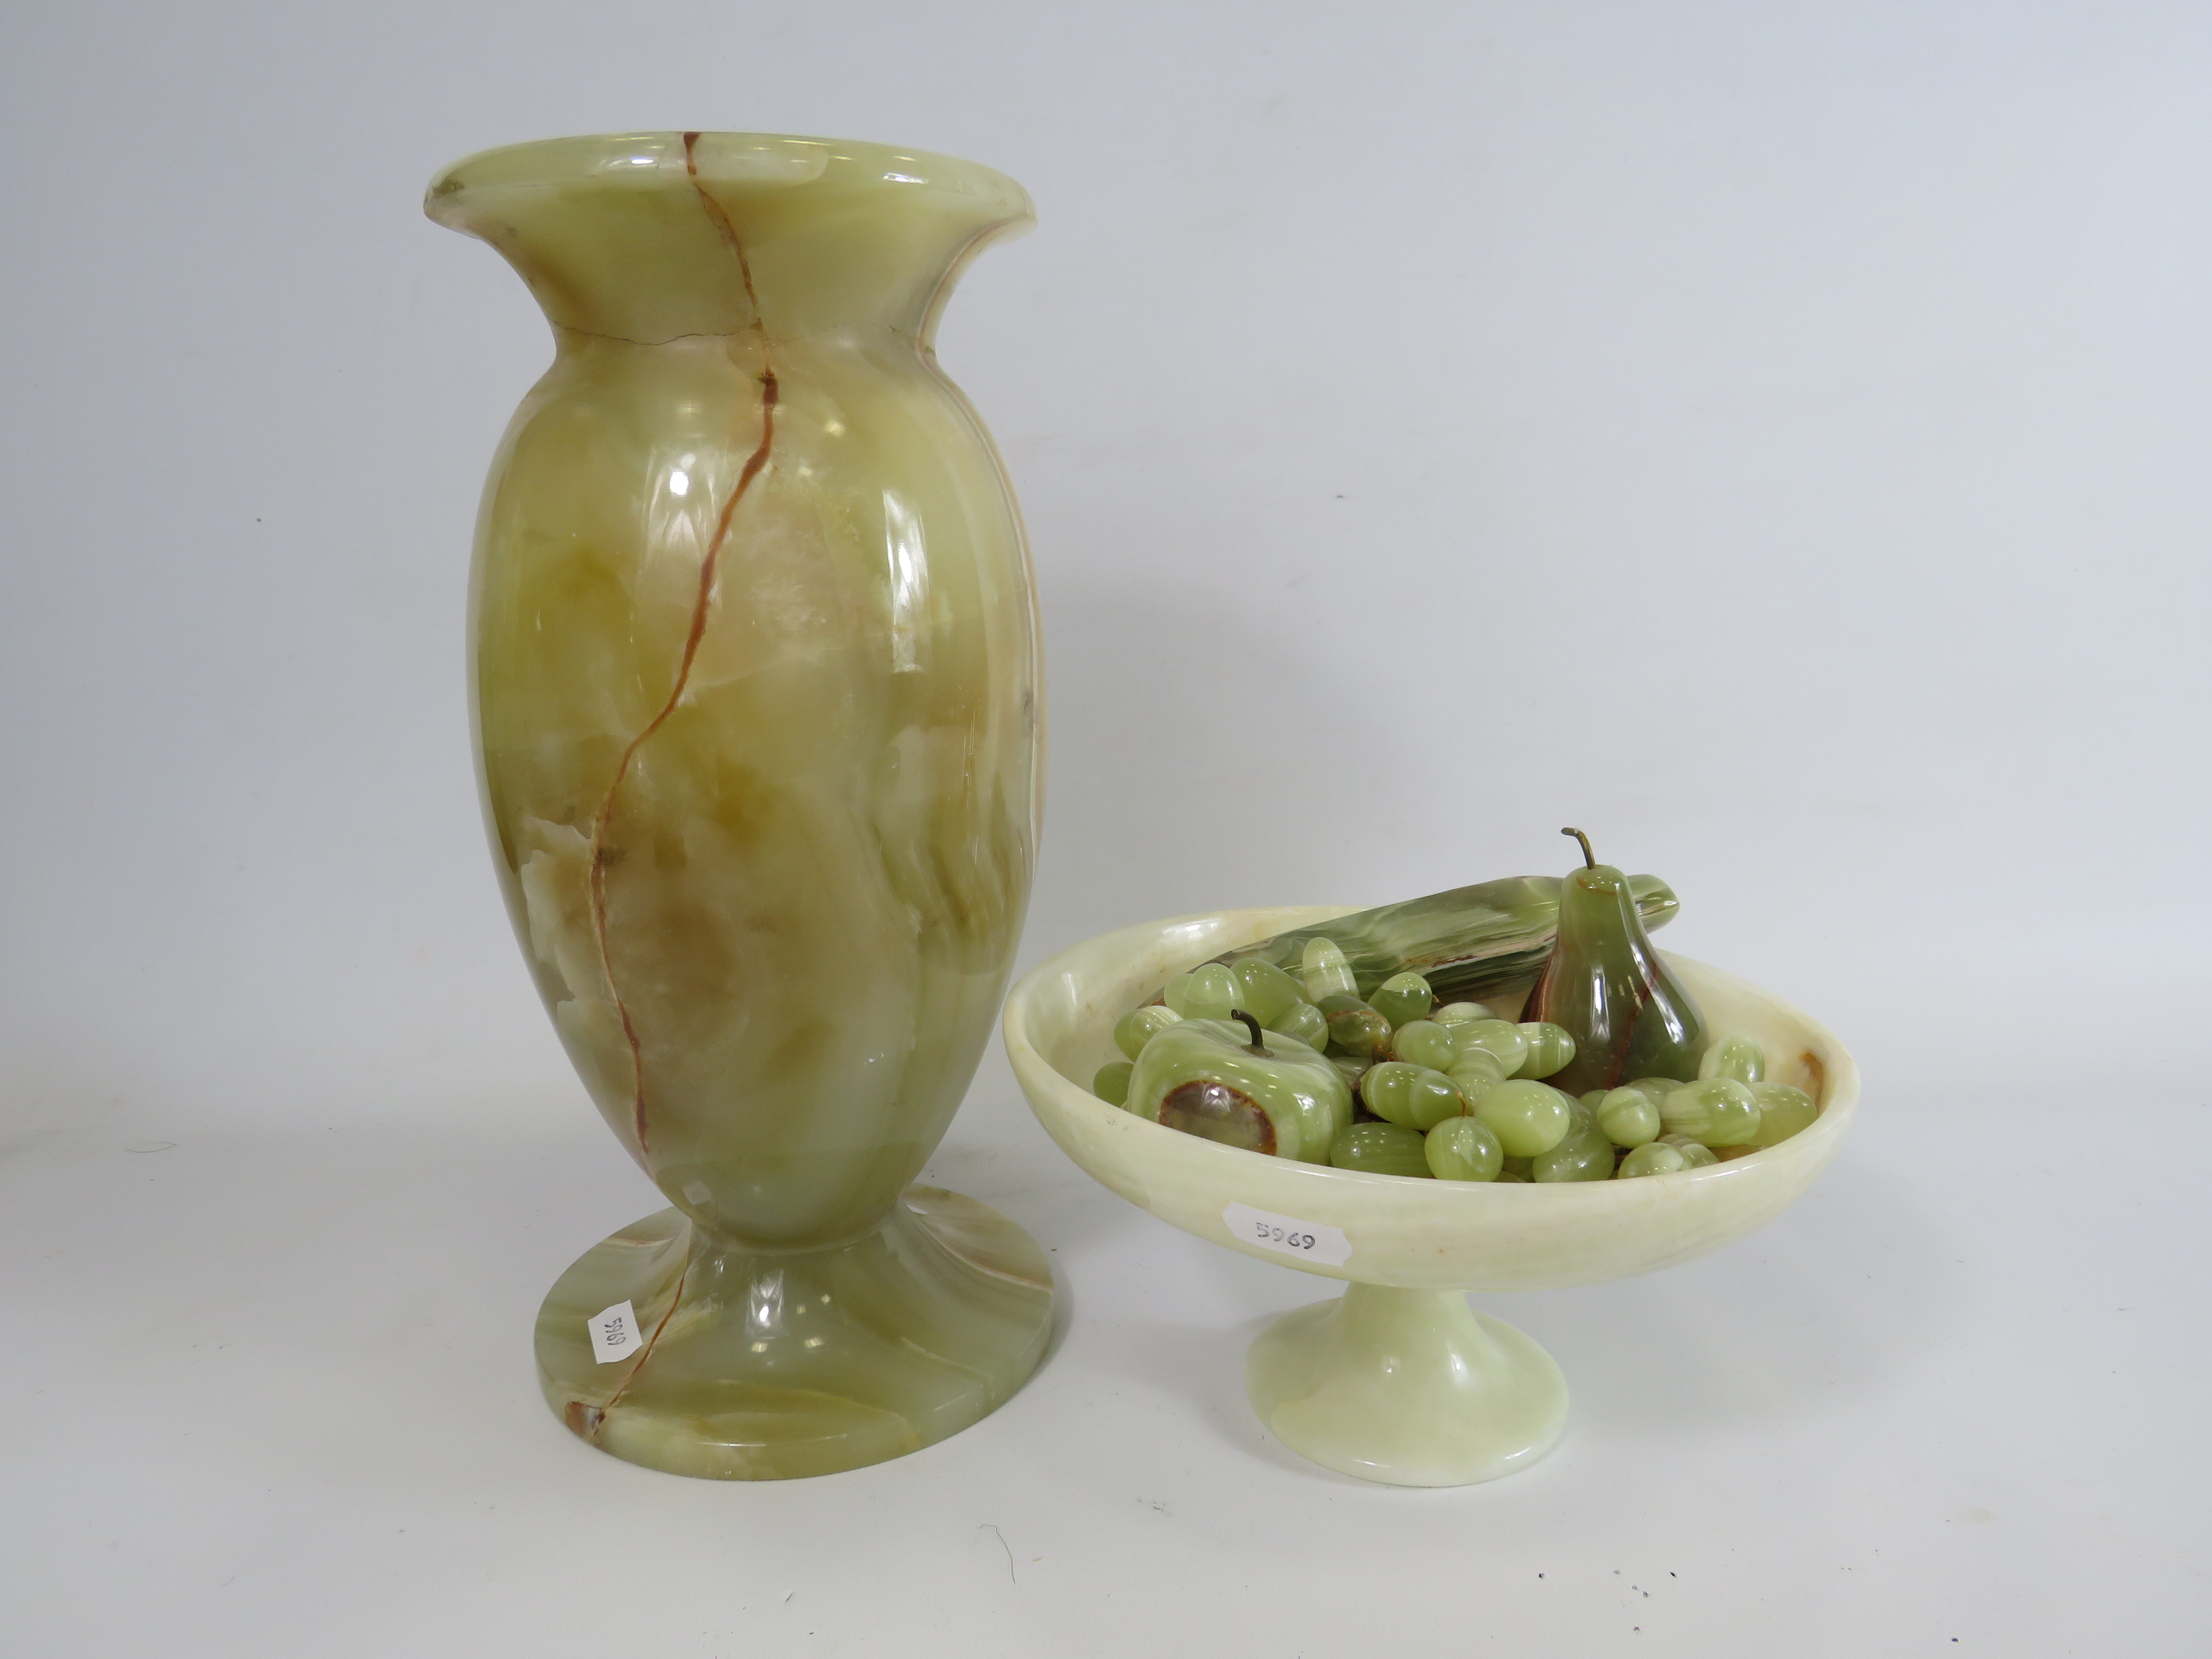 Large onyx vase and a pedastal bowl with a selection of fruit.